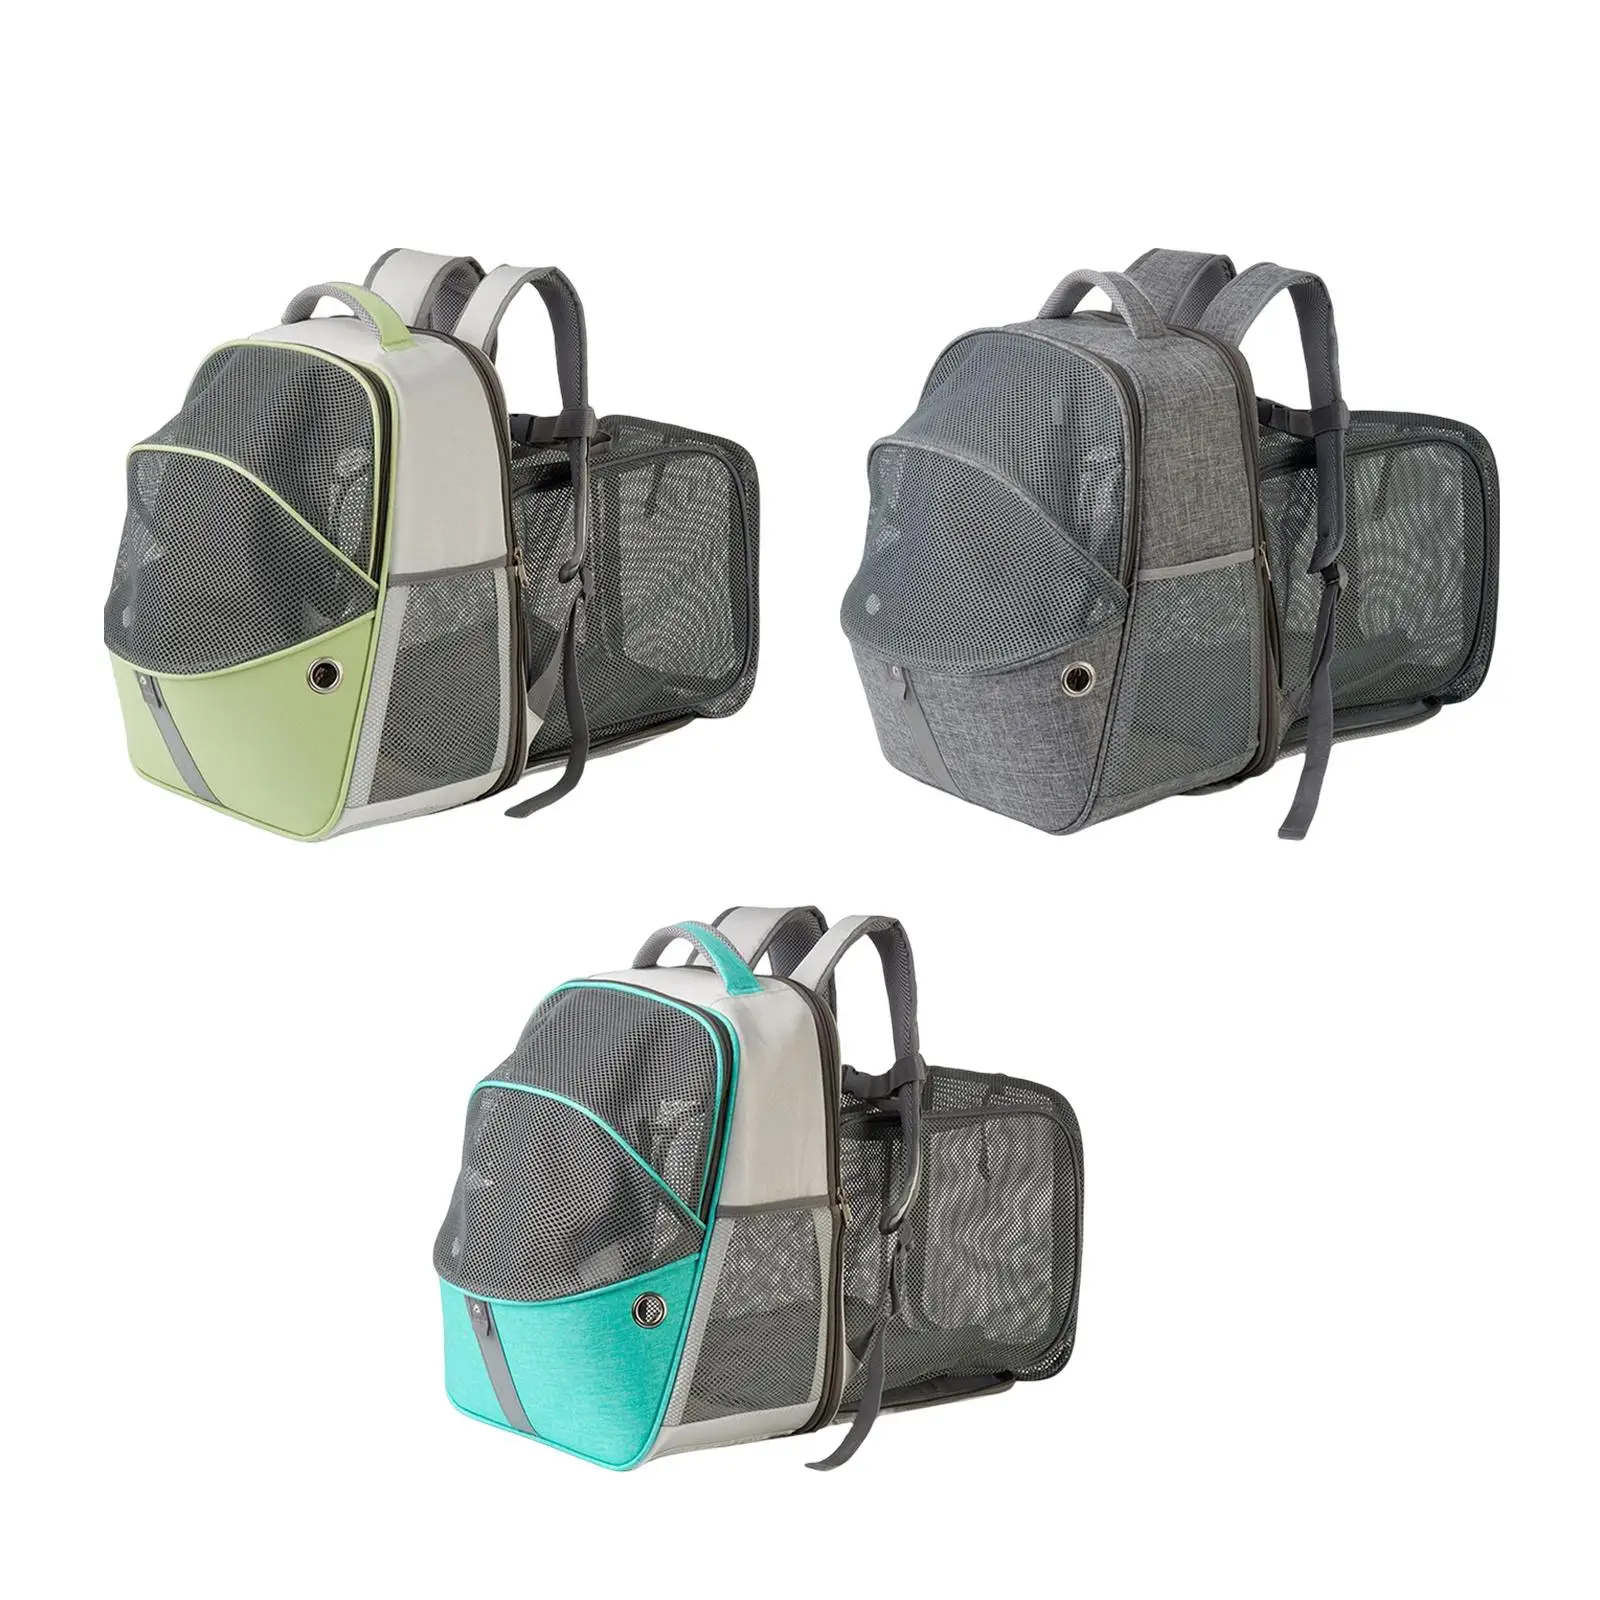 Cat Backpack Carrier Dog Backpack Expandable Pet Carrier Backpack for Small Dogs and Cats